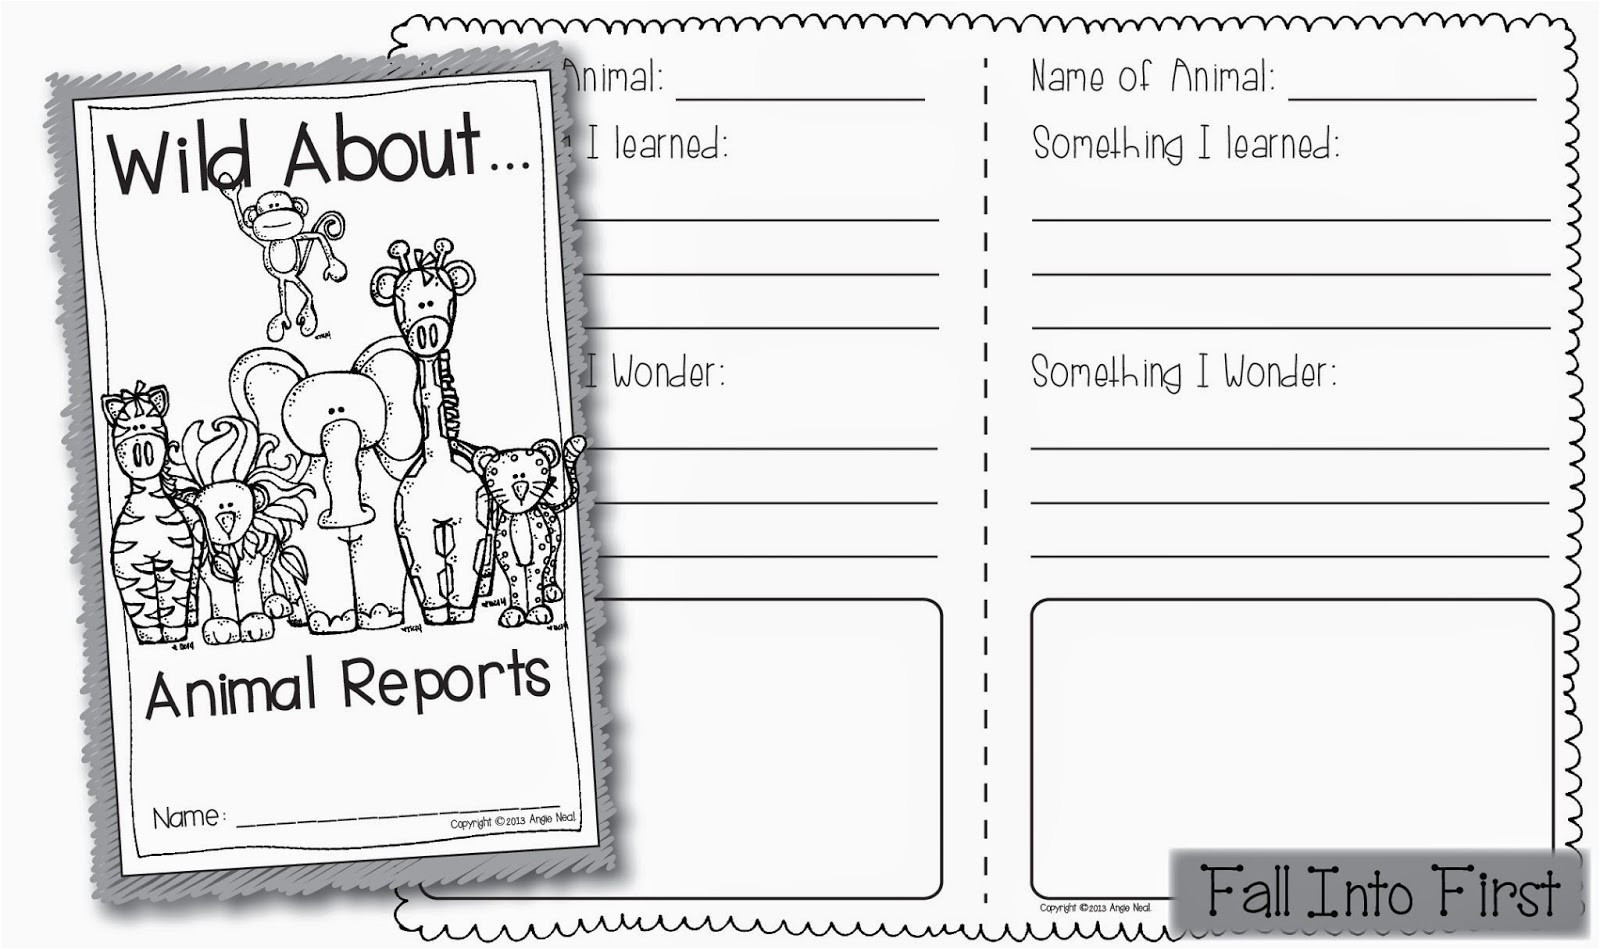 zoopals animal reports